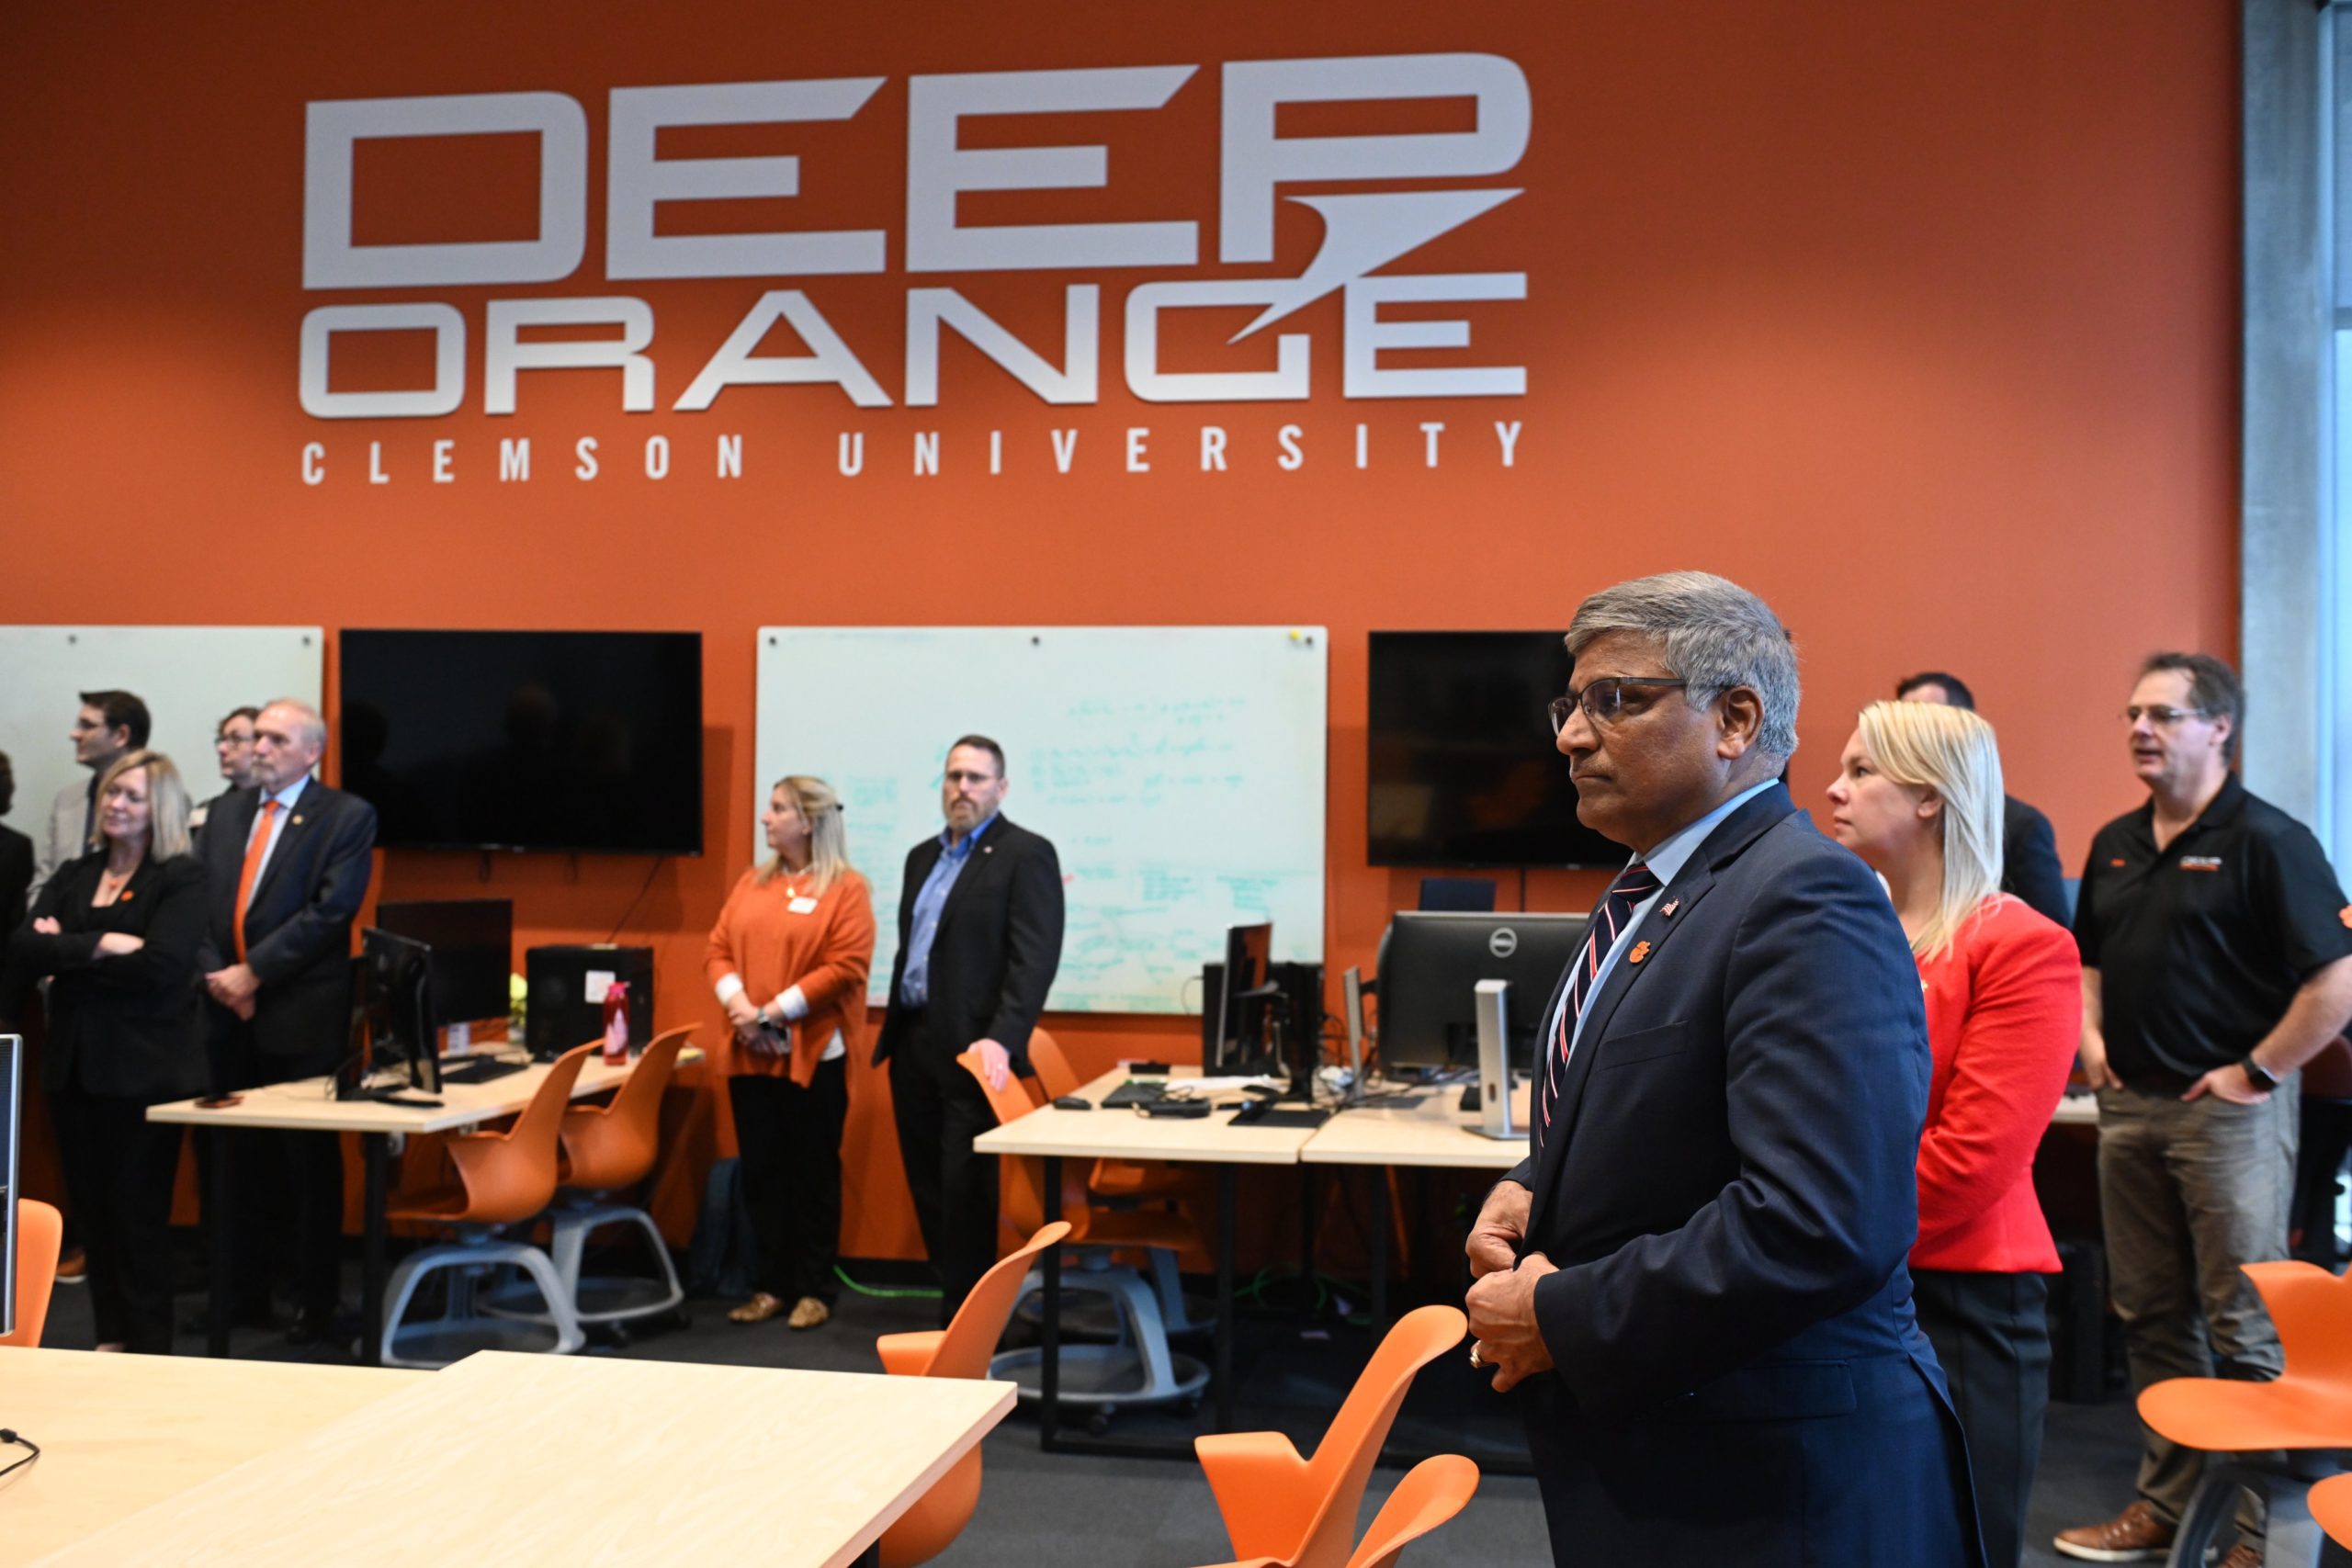 Ten people, including the NSF Director, are standing by a number of tables at the Clemson ICAR campus. Inside the multi-stories room is a background wall with the words "Deep Orange" printed on the wall.